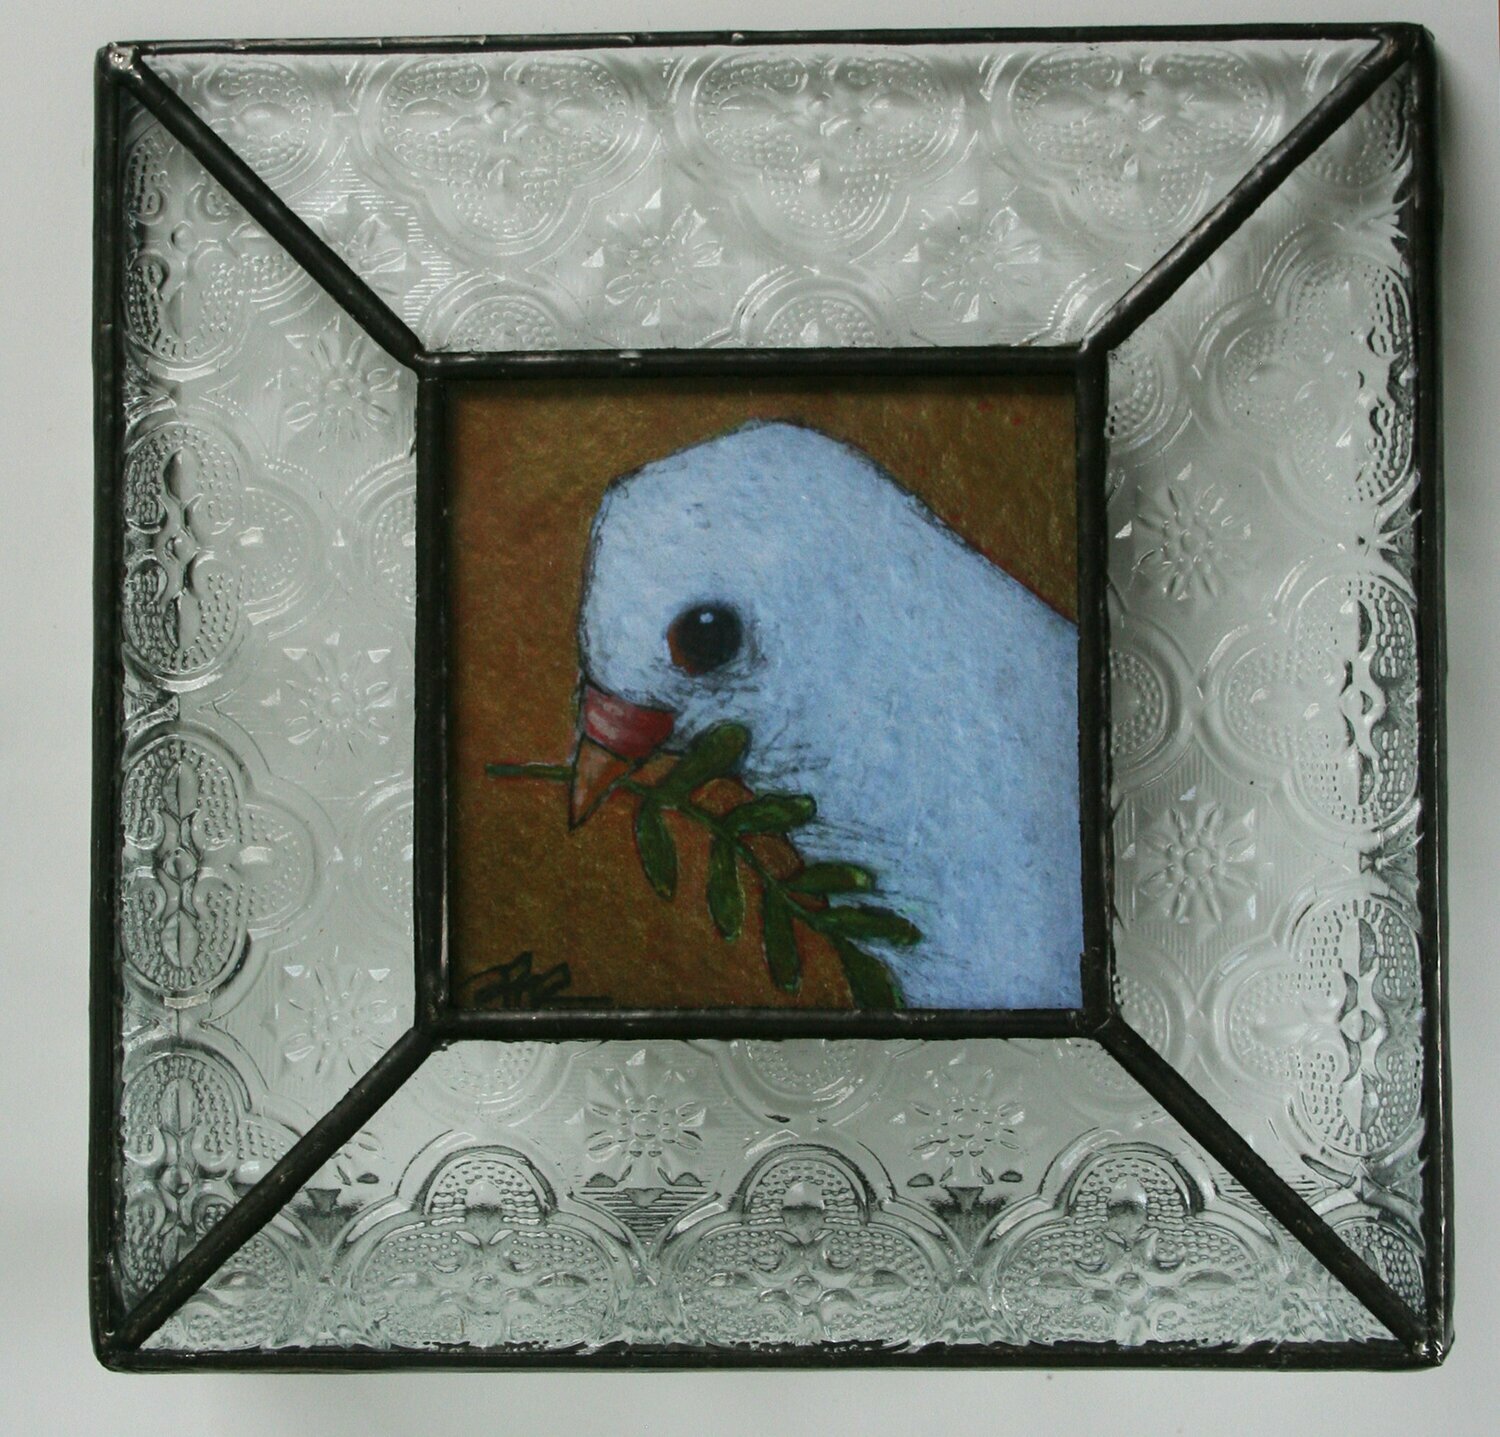 dove of peace white dove bird 3x3" a2n2koon print in stained glass clear vintage-style stand-up frame.  limited edition. comes in gift box.